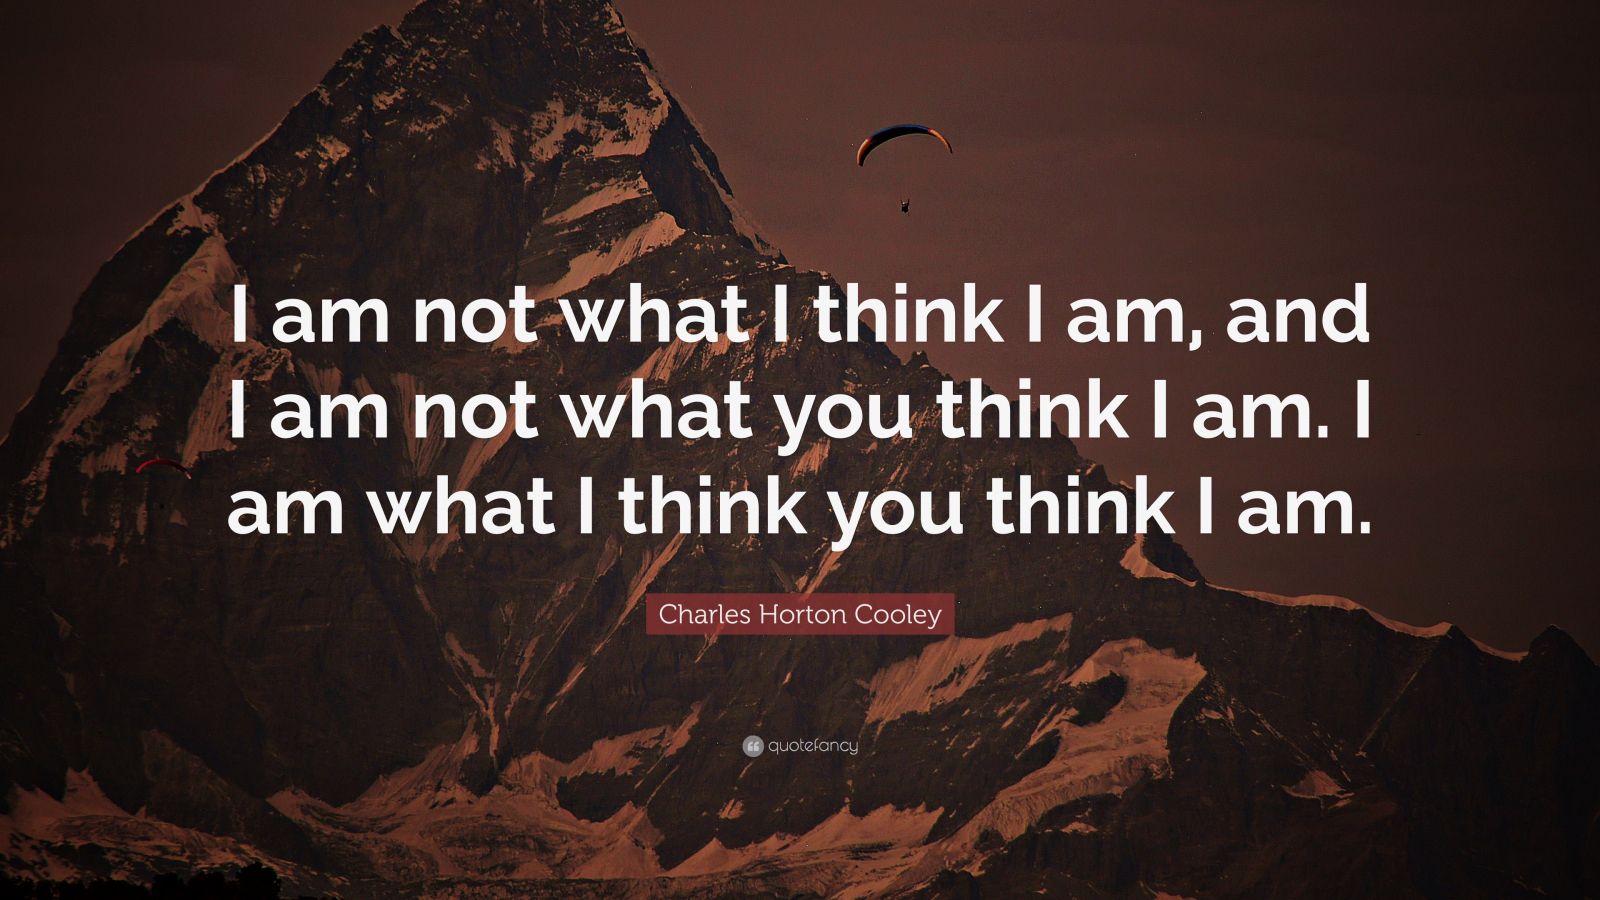 Charles Horton Cooley Quote: “I am not what I think I am, and I am not what you think I am. I am